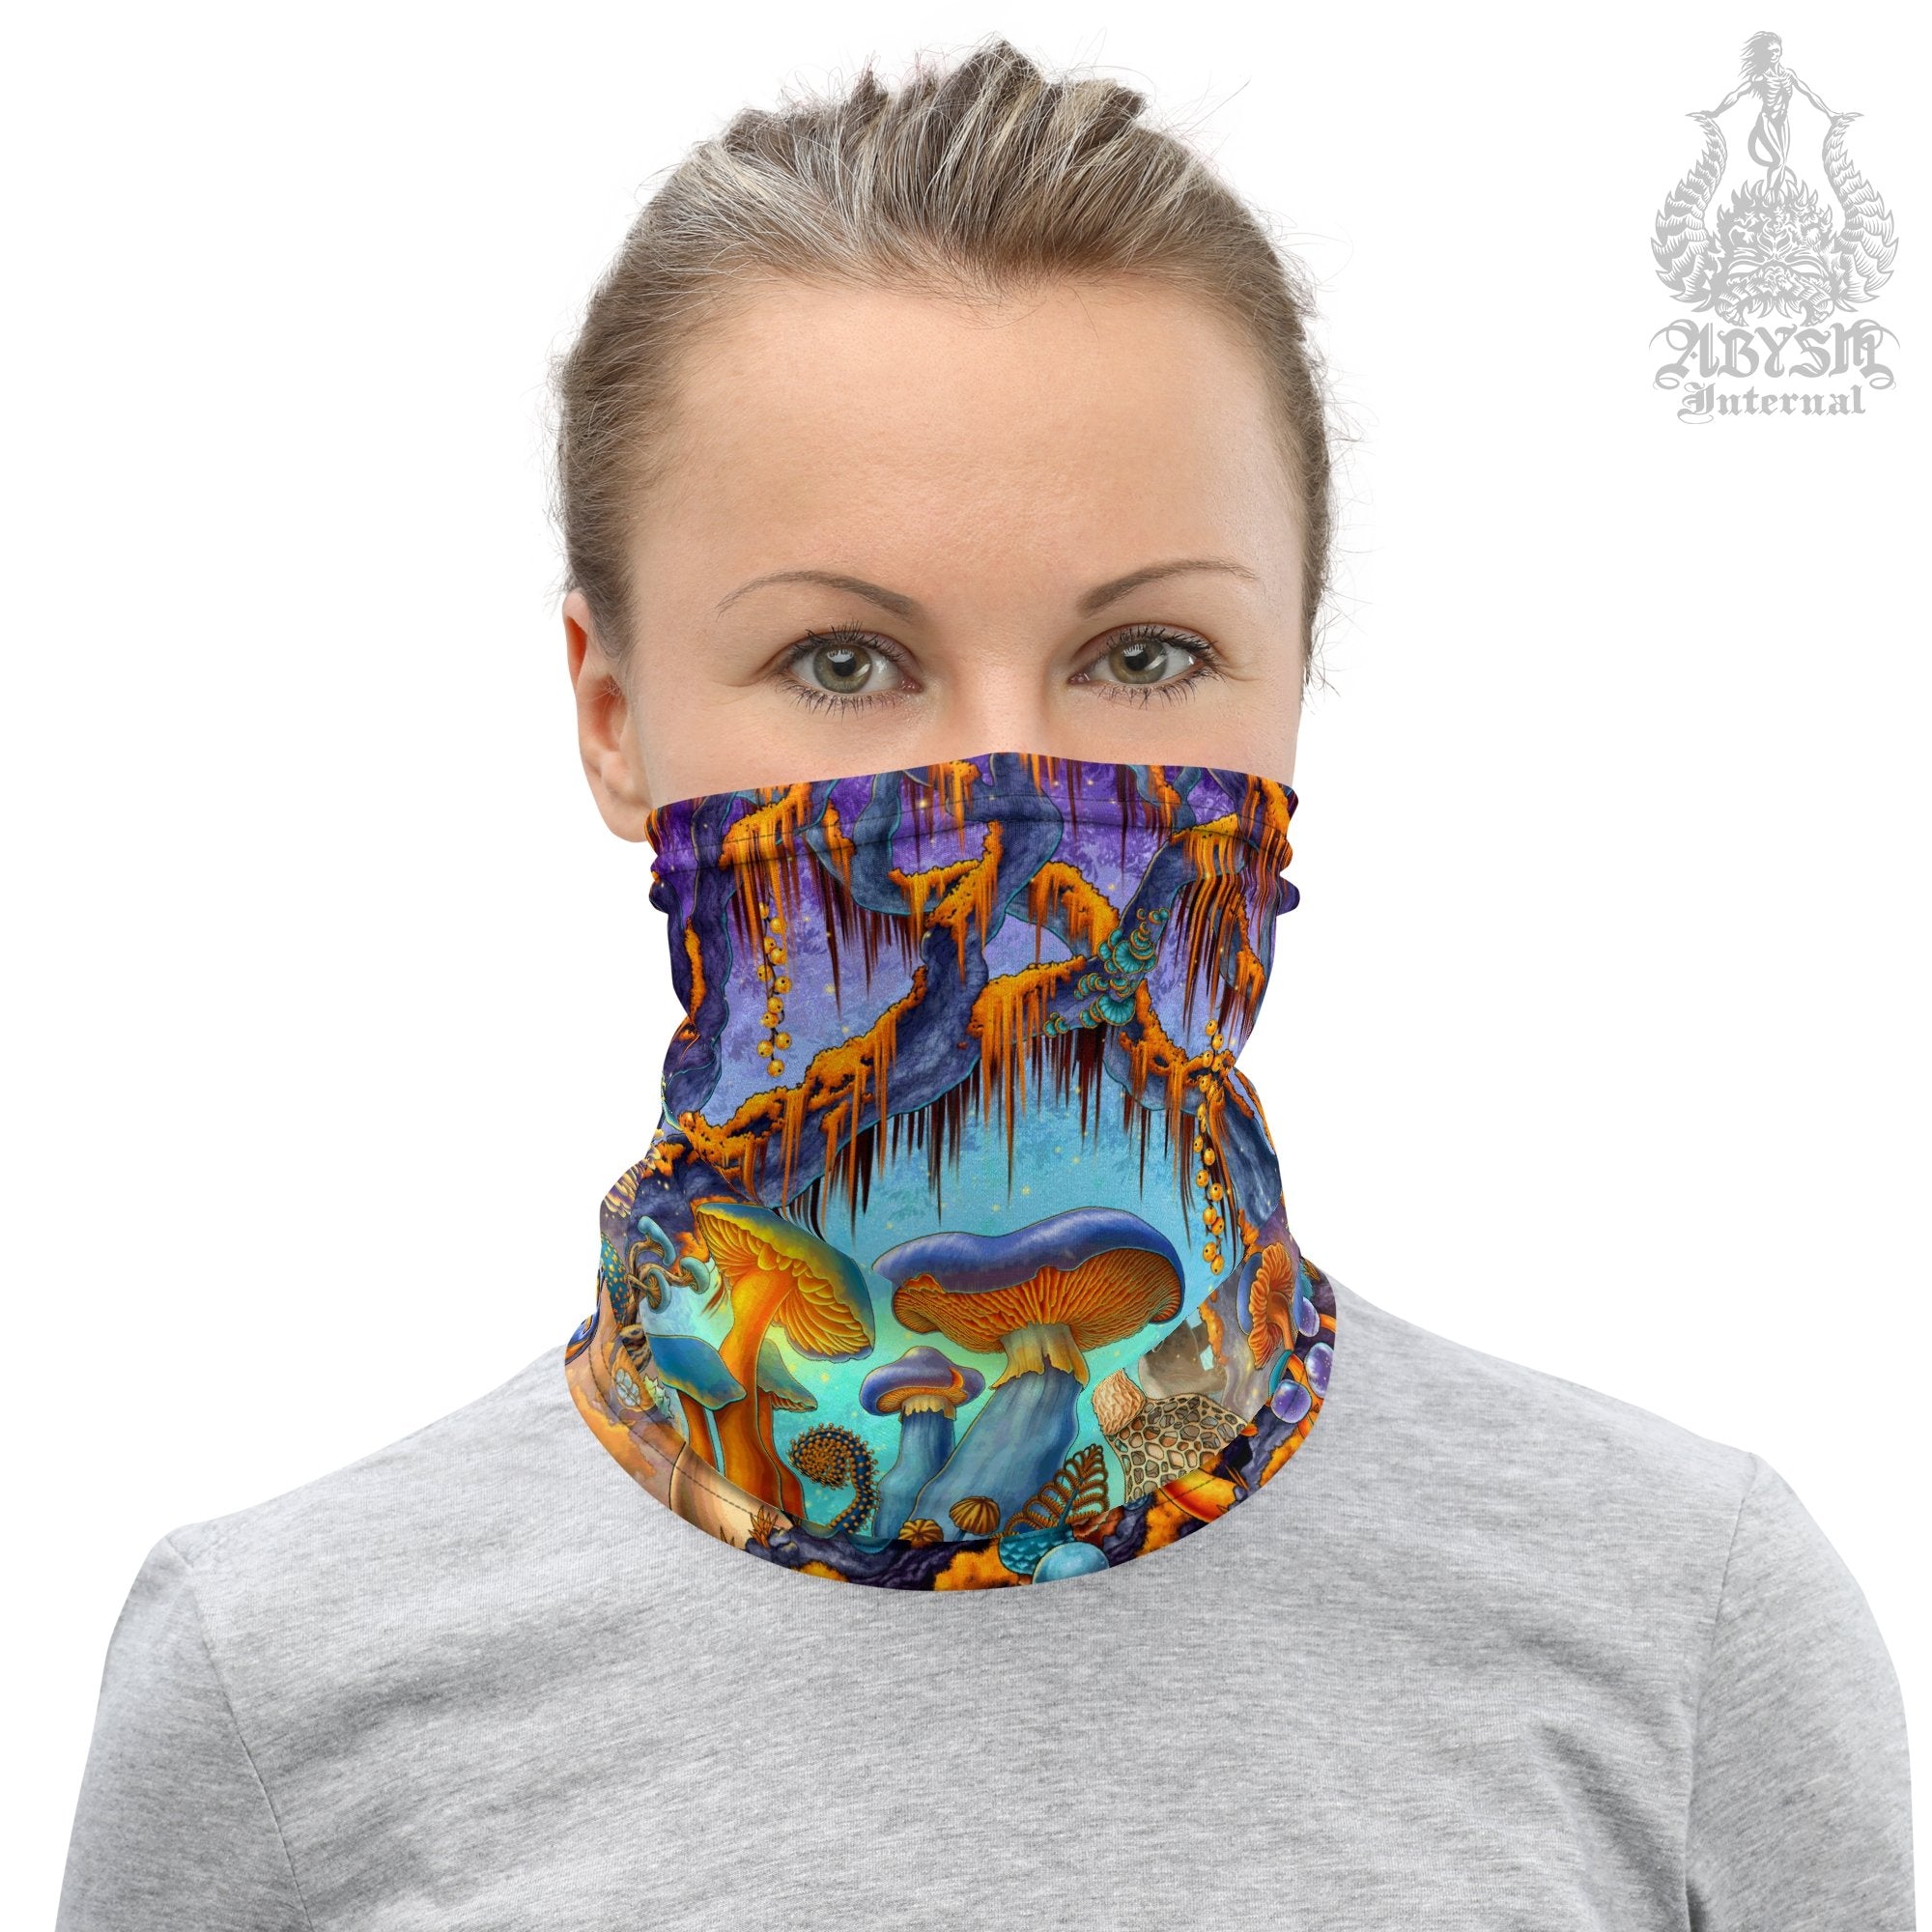 Mushrooms Neck Gaiter, Face Mask, Head Covering, Magic Shrooms Art, Indie Festival Outfit, Mycologyst Gift - Cyan and Gold - Abysm Internal